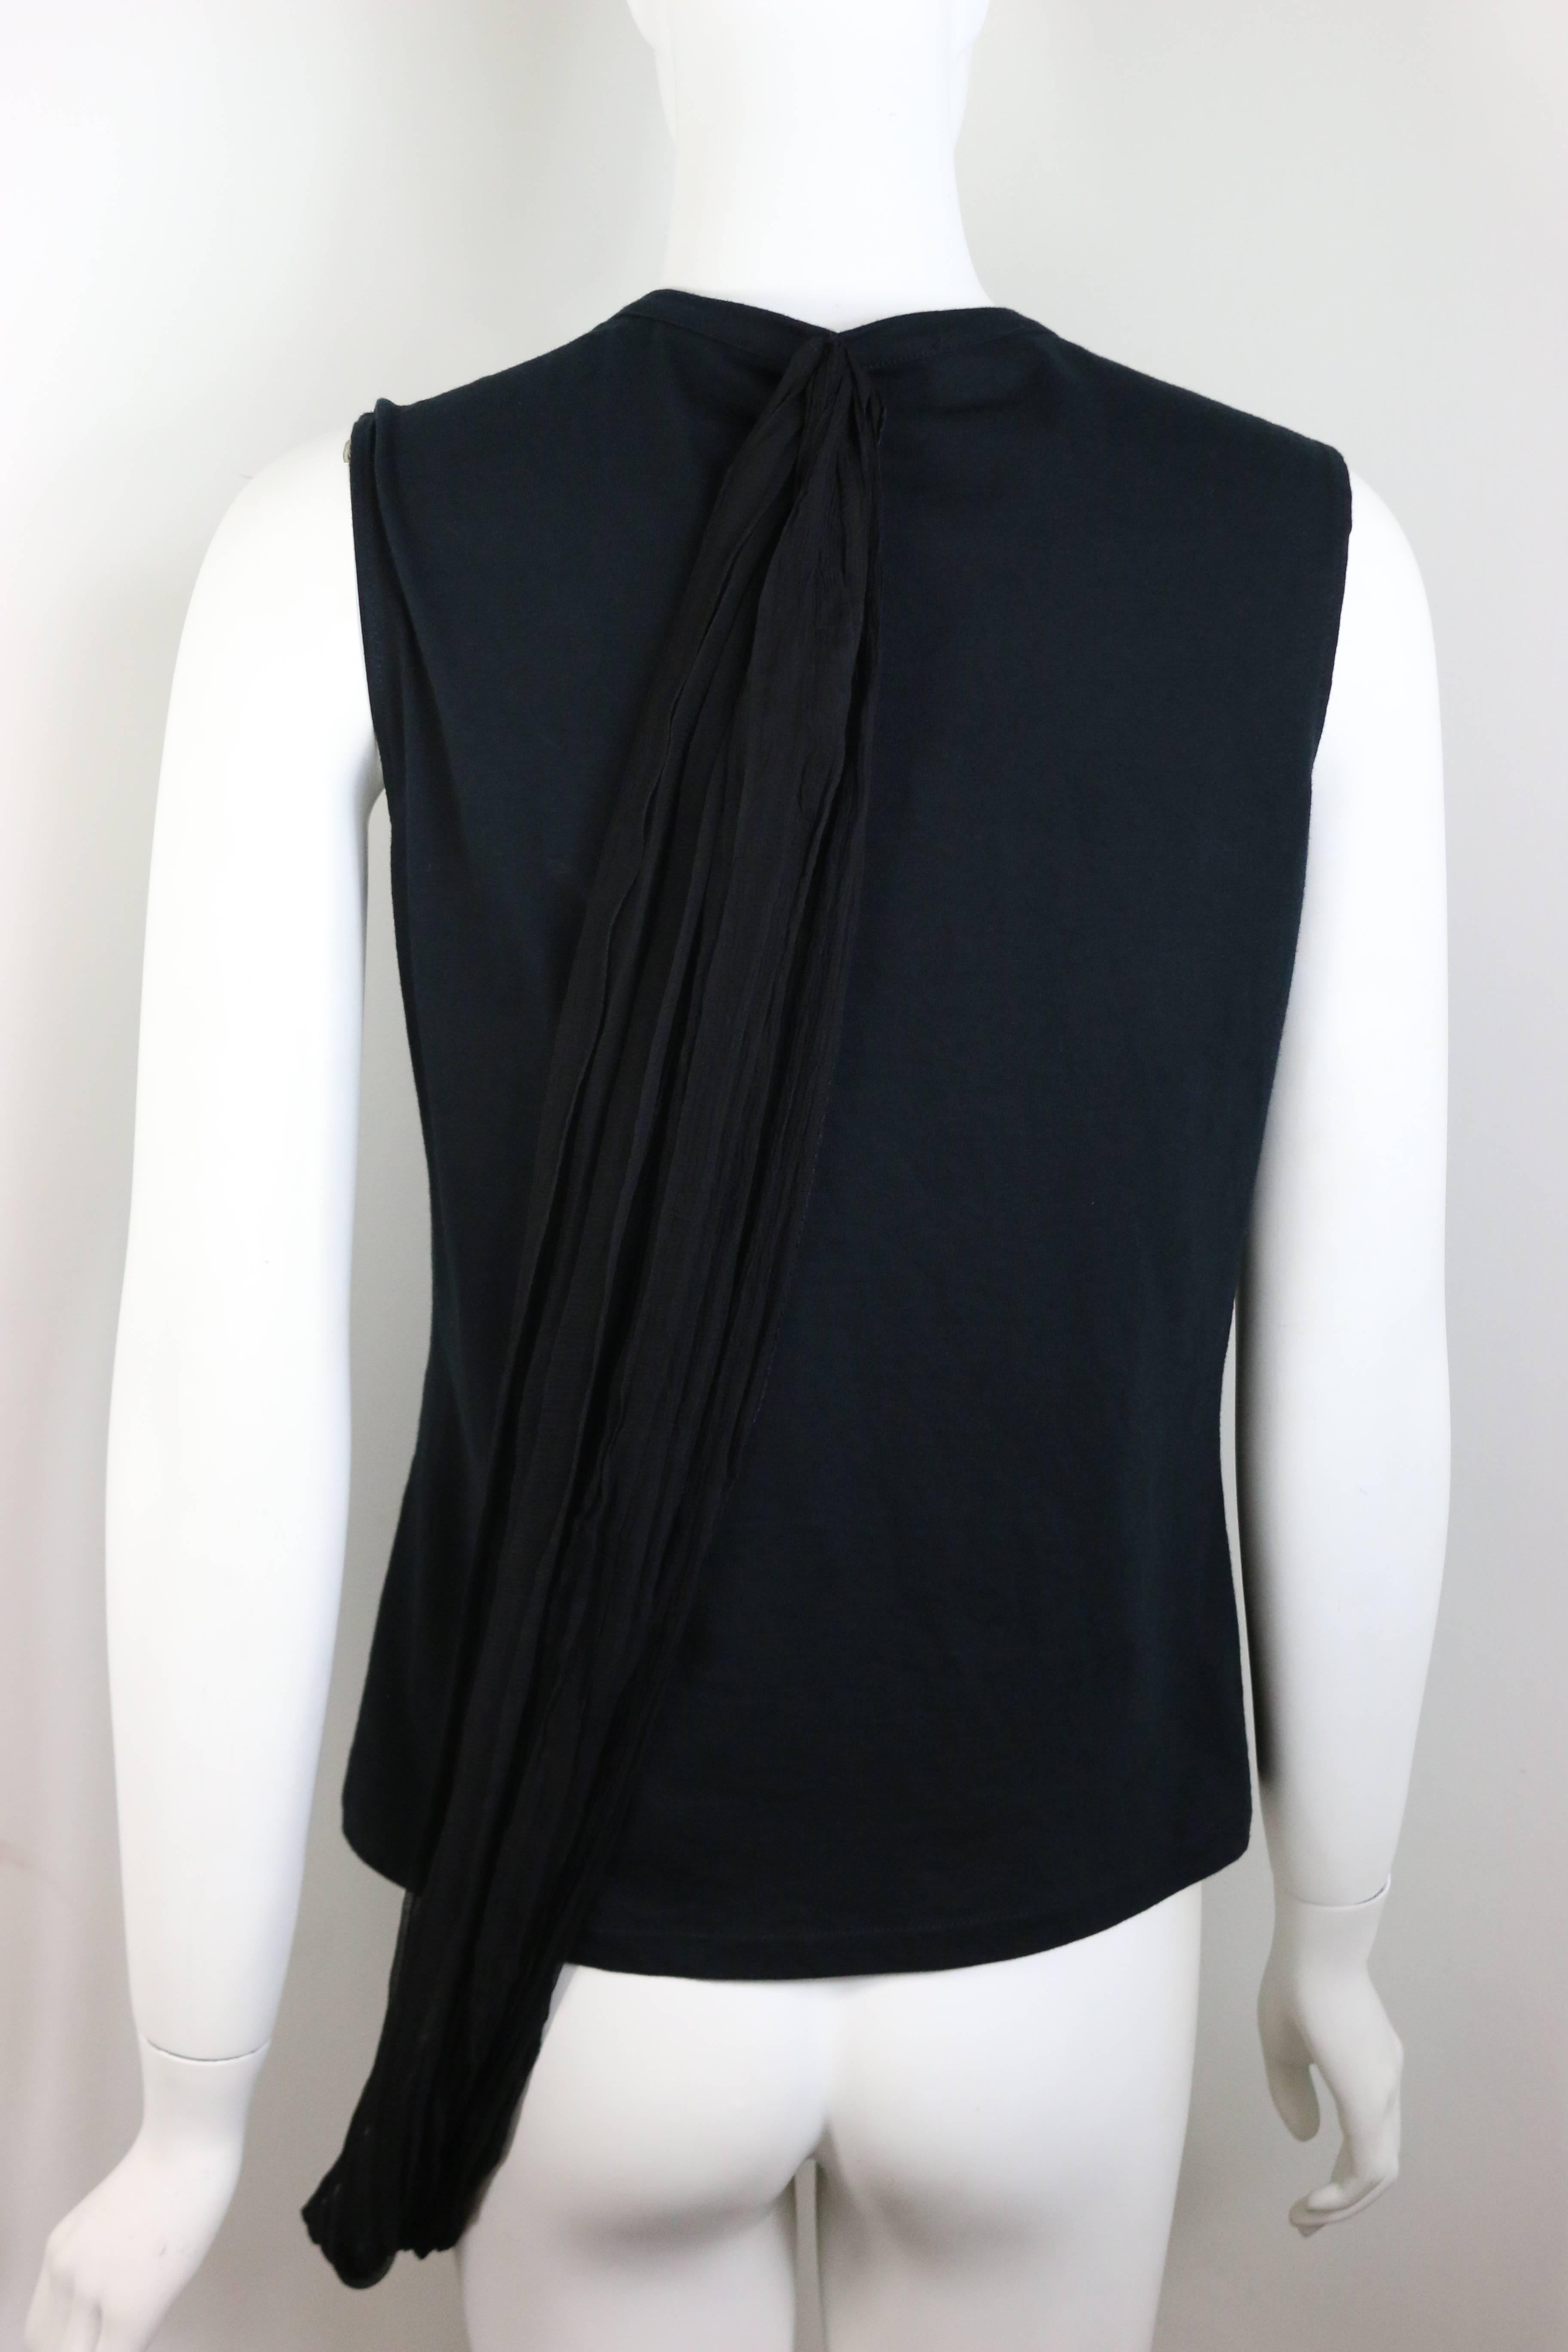 - This Dior black tank top from early 2000s John Galliano. It has a black silk wrapping details connected from the bottom front to the back top. You can play around the wrap the way you want wrapping around your body. 

- Size 42 FR, USA 10. 

-